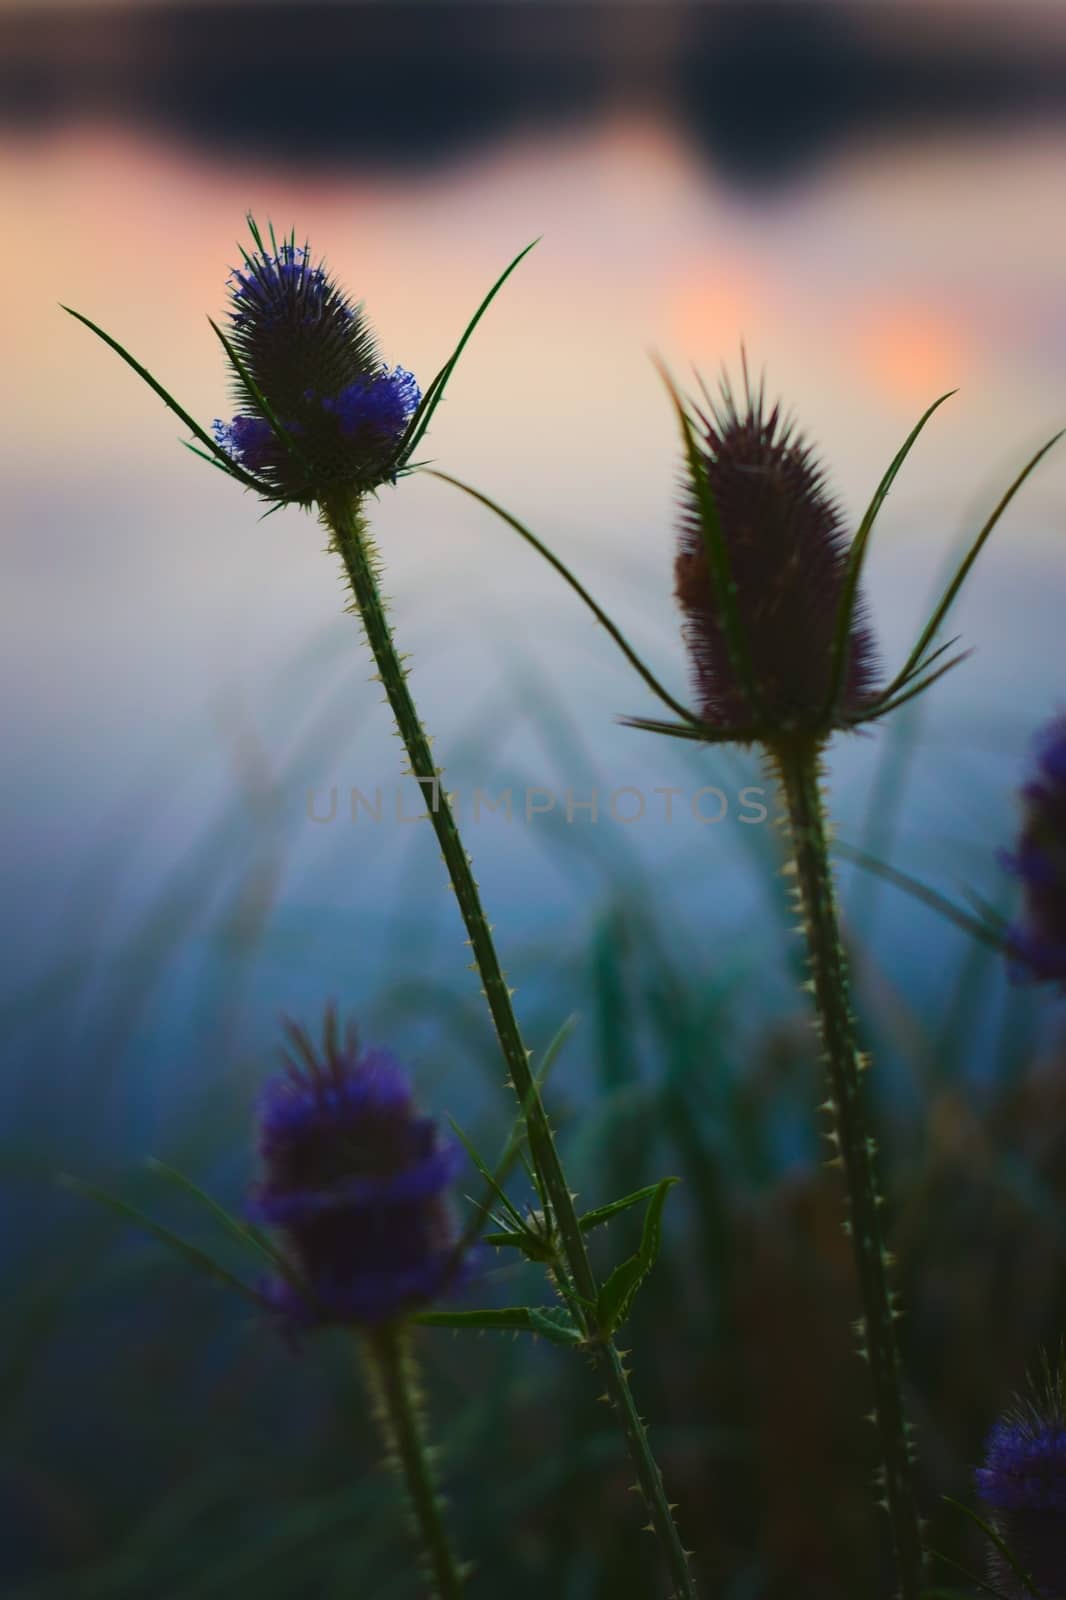 Thistles and long grass silhouetted against the reflections of the twilight sky by hernan_hyper